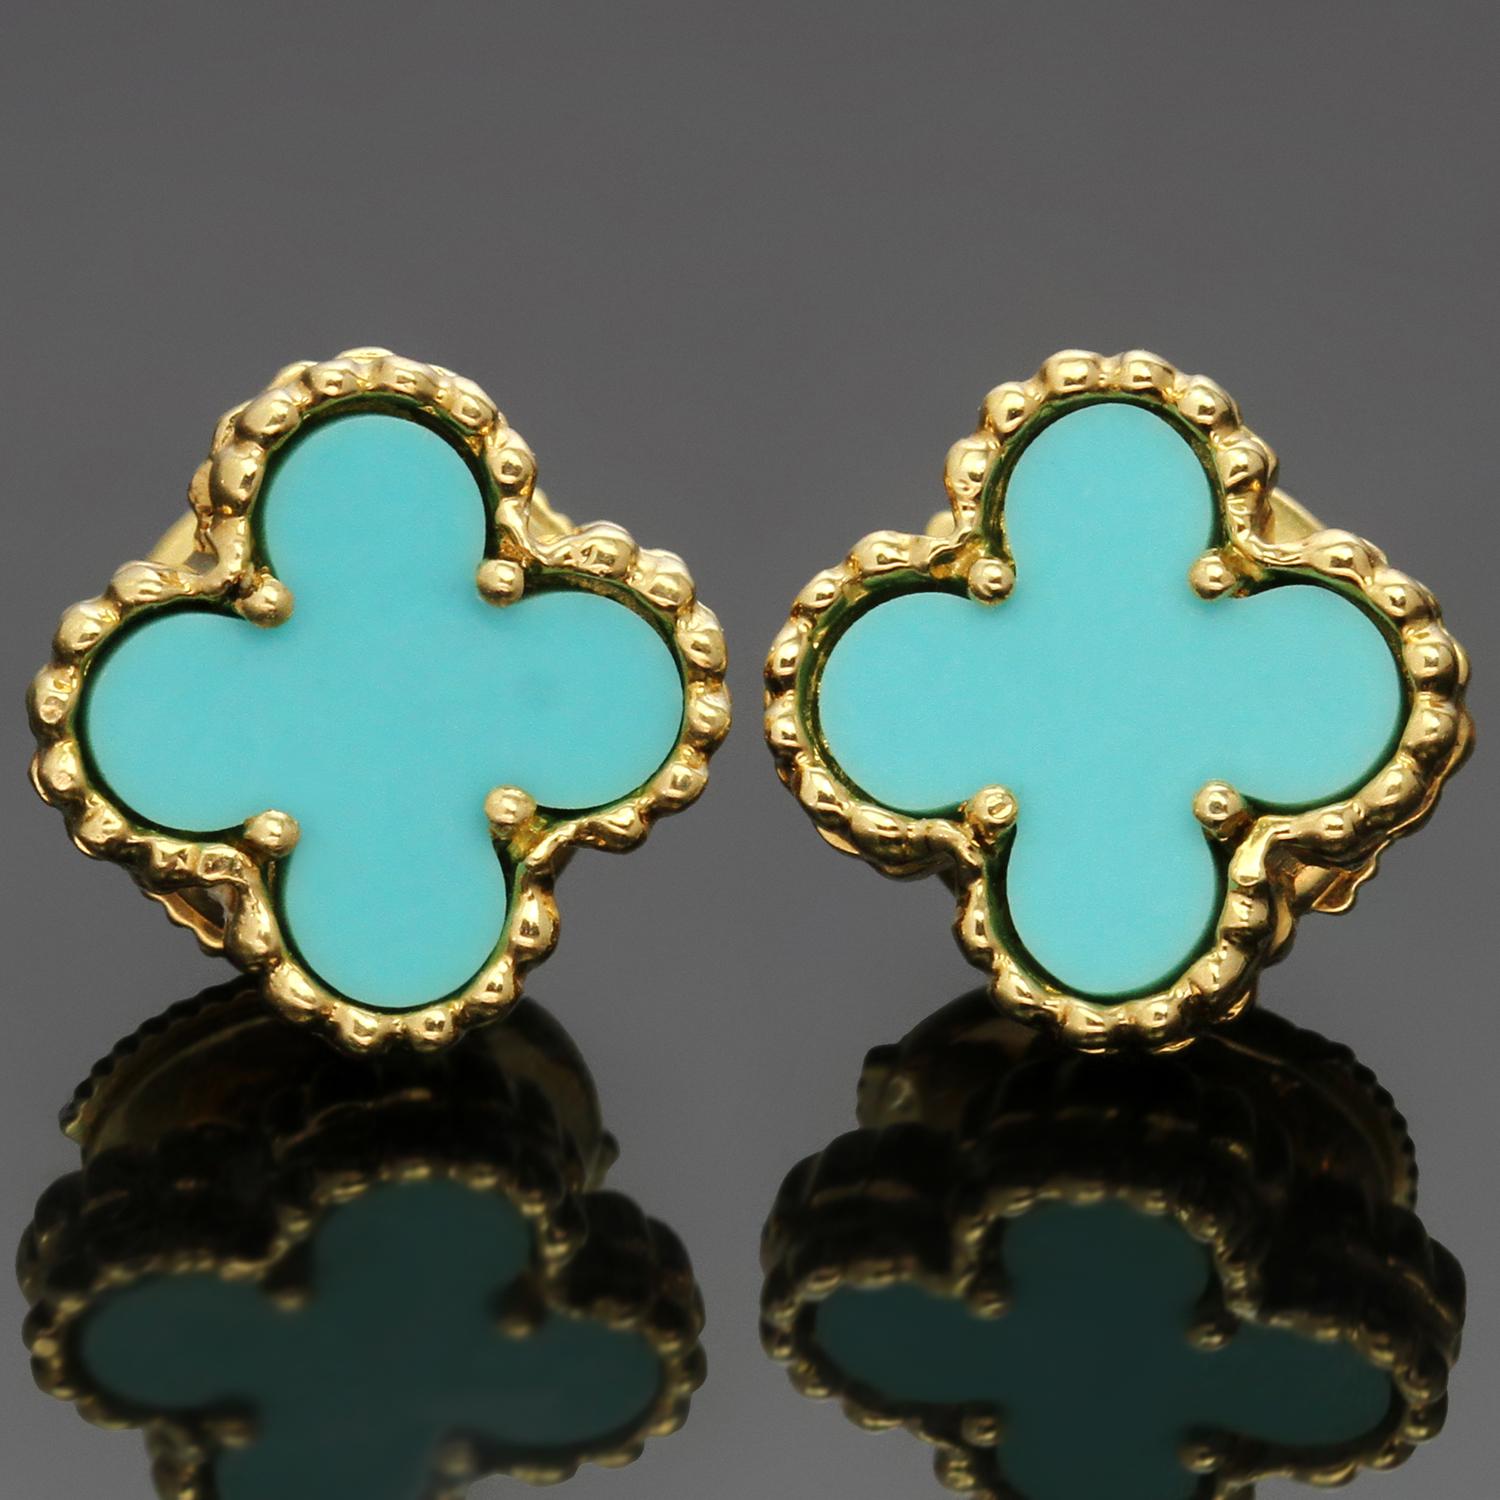 These stunning Van Cleef & Arpels stud earrings from the iconic Sweet Alhambra collection feature the lucky clover design crafted in 18k yellow gold and set with blue turquoise. Made in France circa 2008. Measurements: 0.35